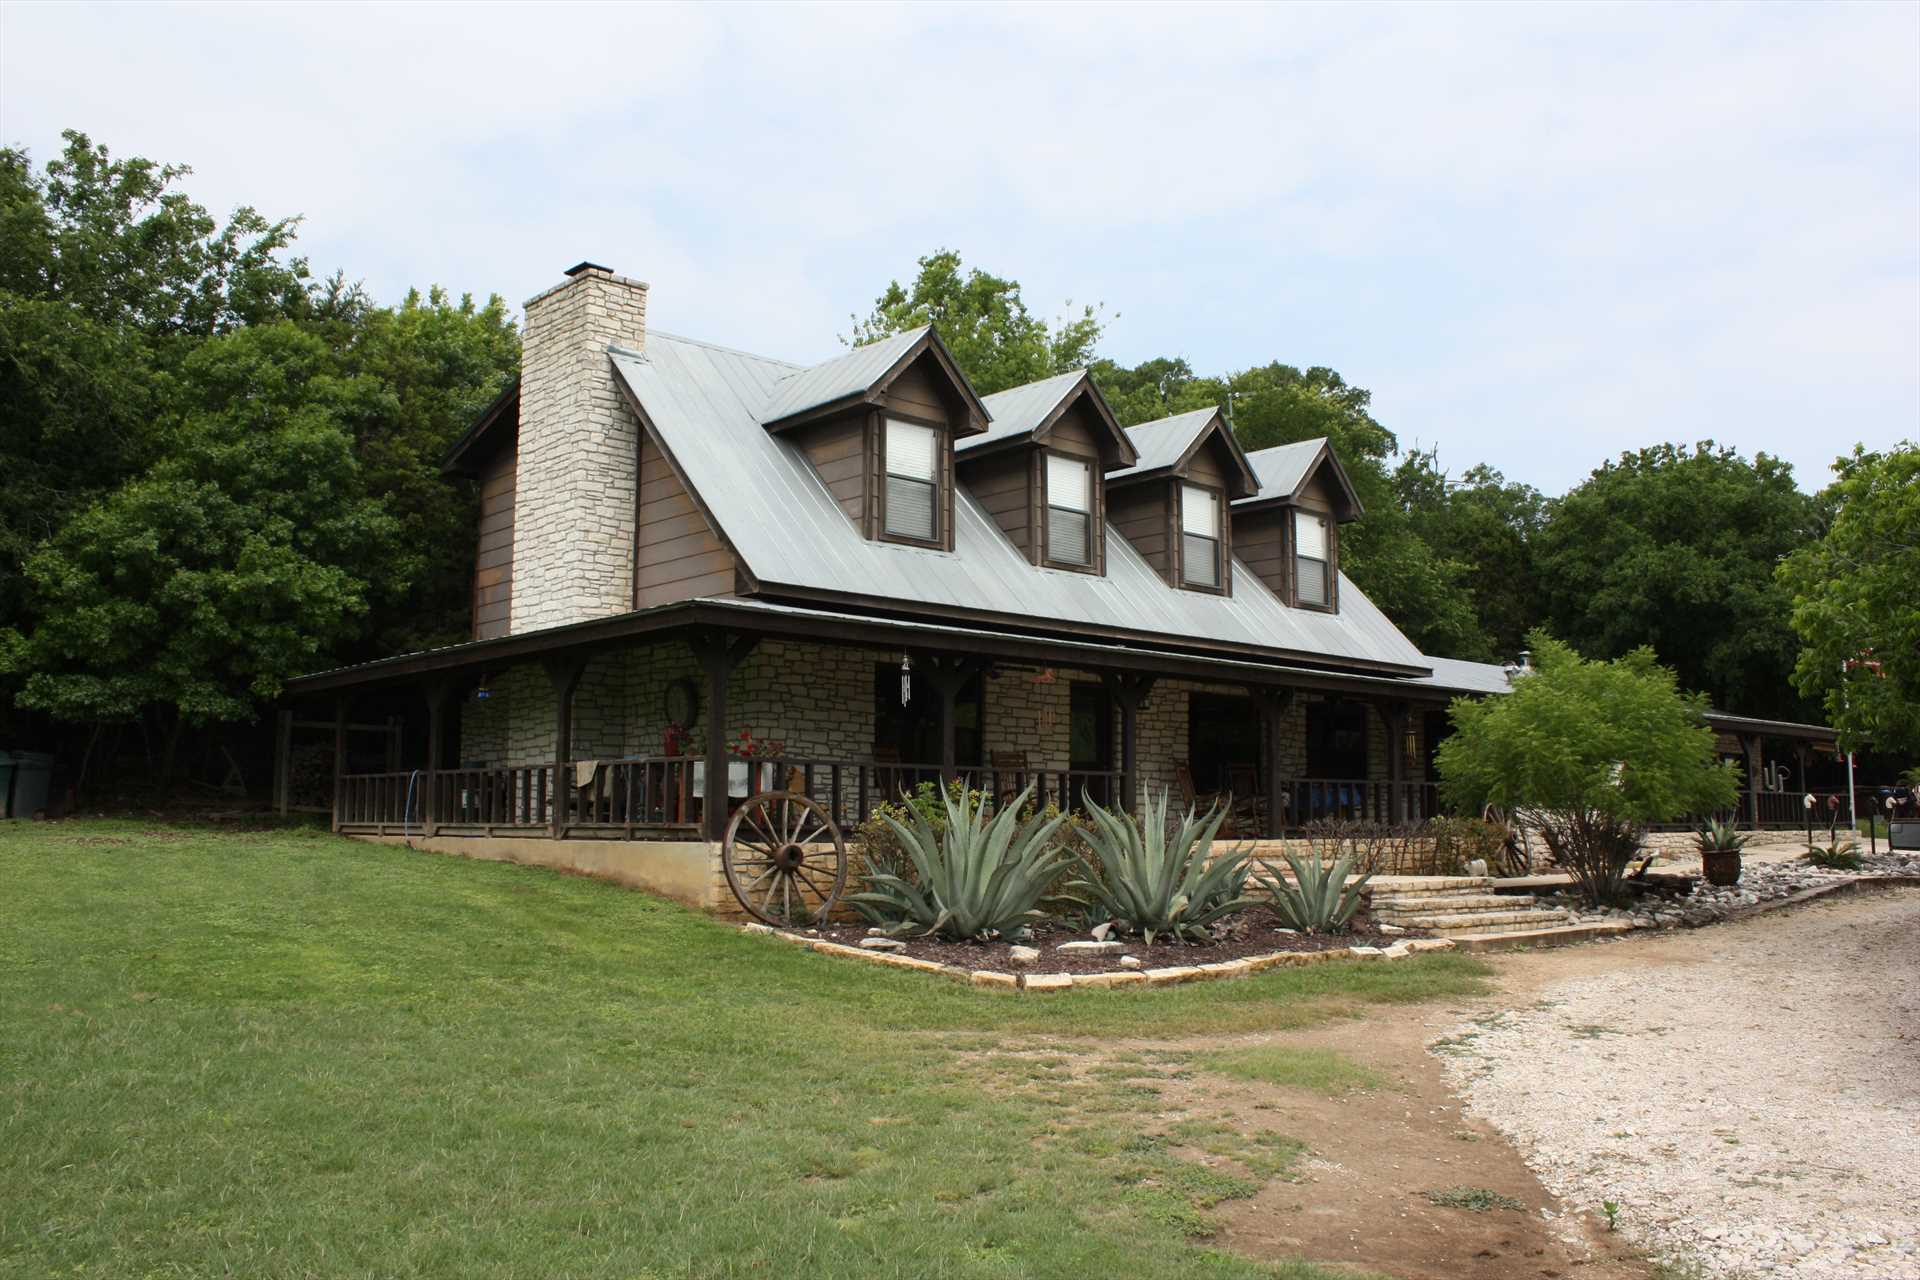                                                 Mosey on down to the main house each morning, where a great big Texas breakfast awaits!